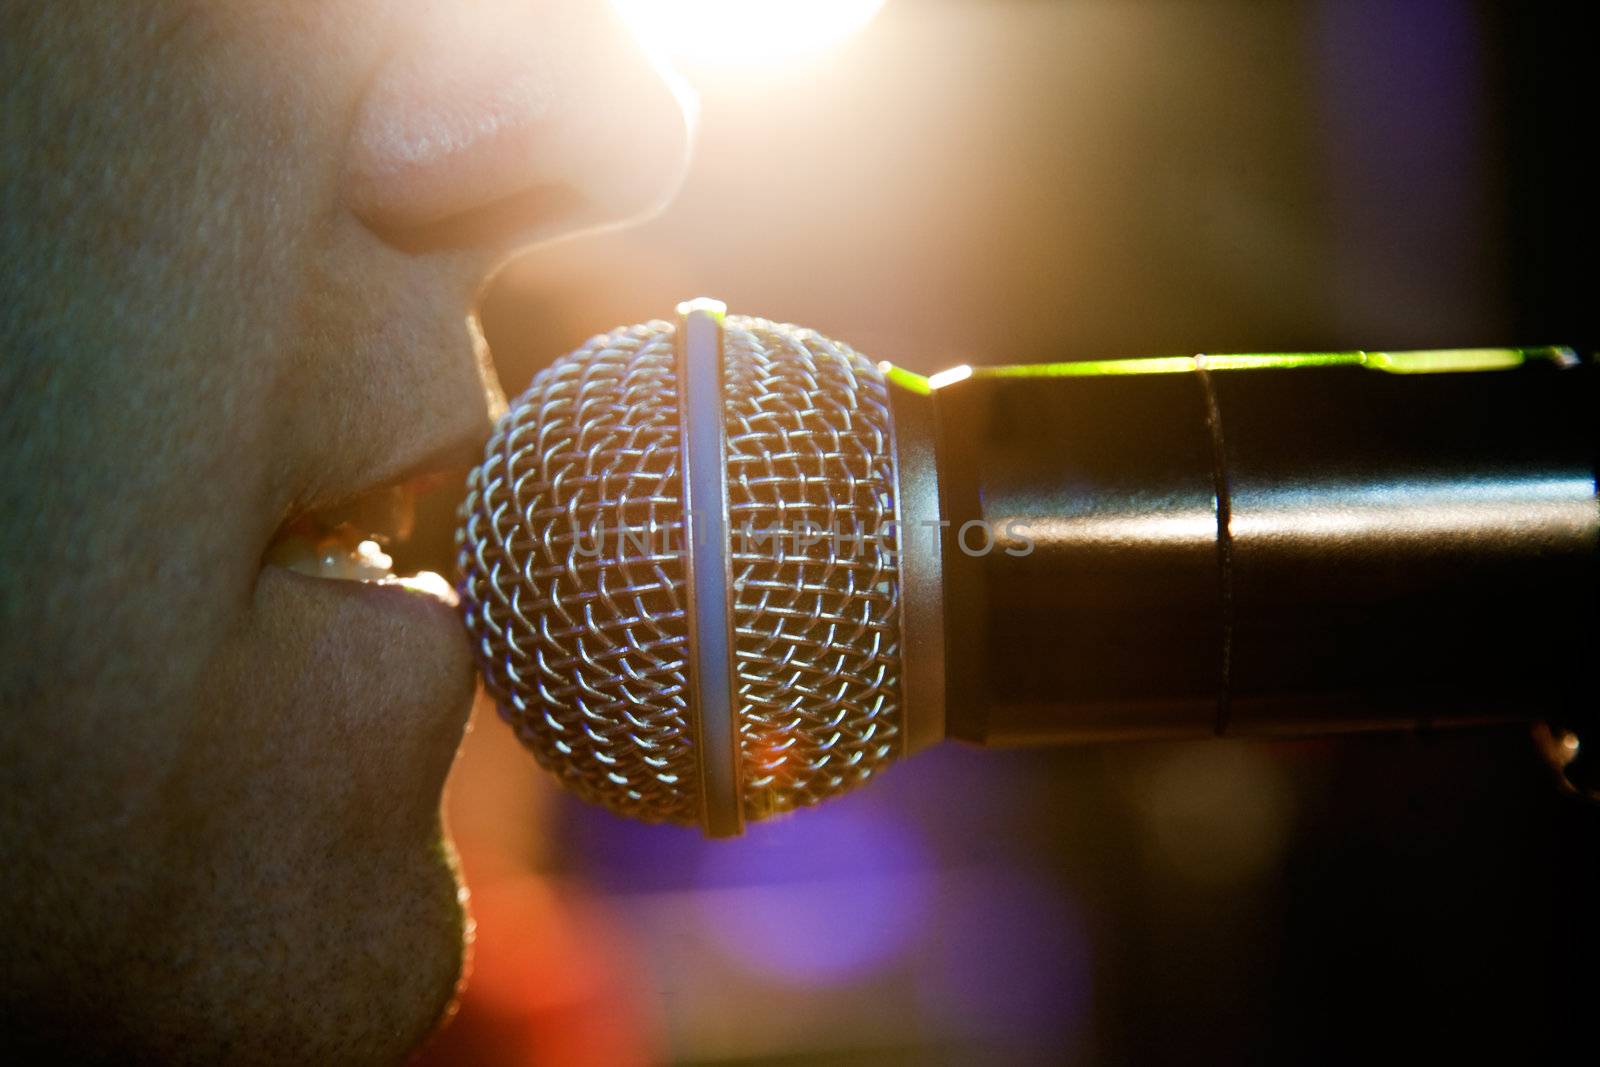 Singer and microphone by carloscastilla